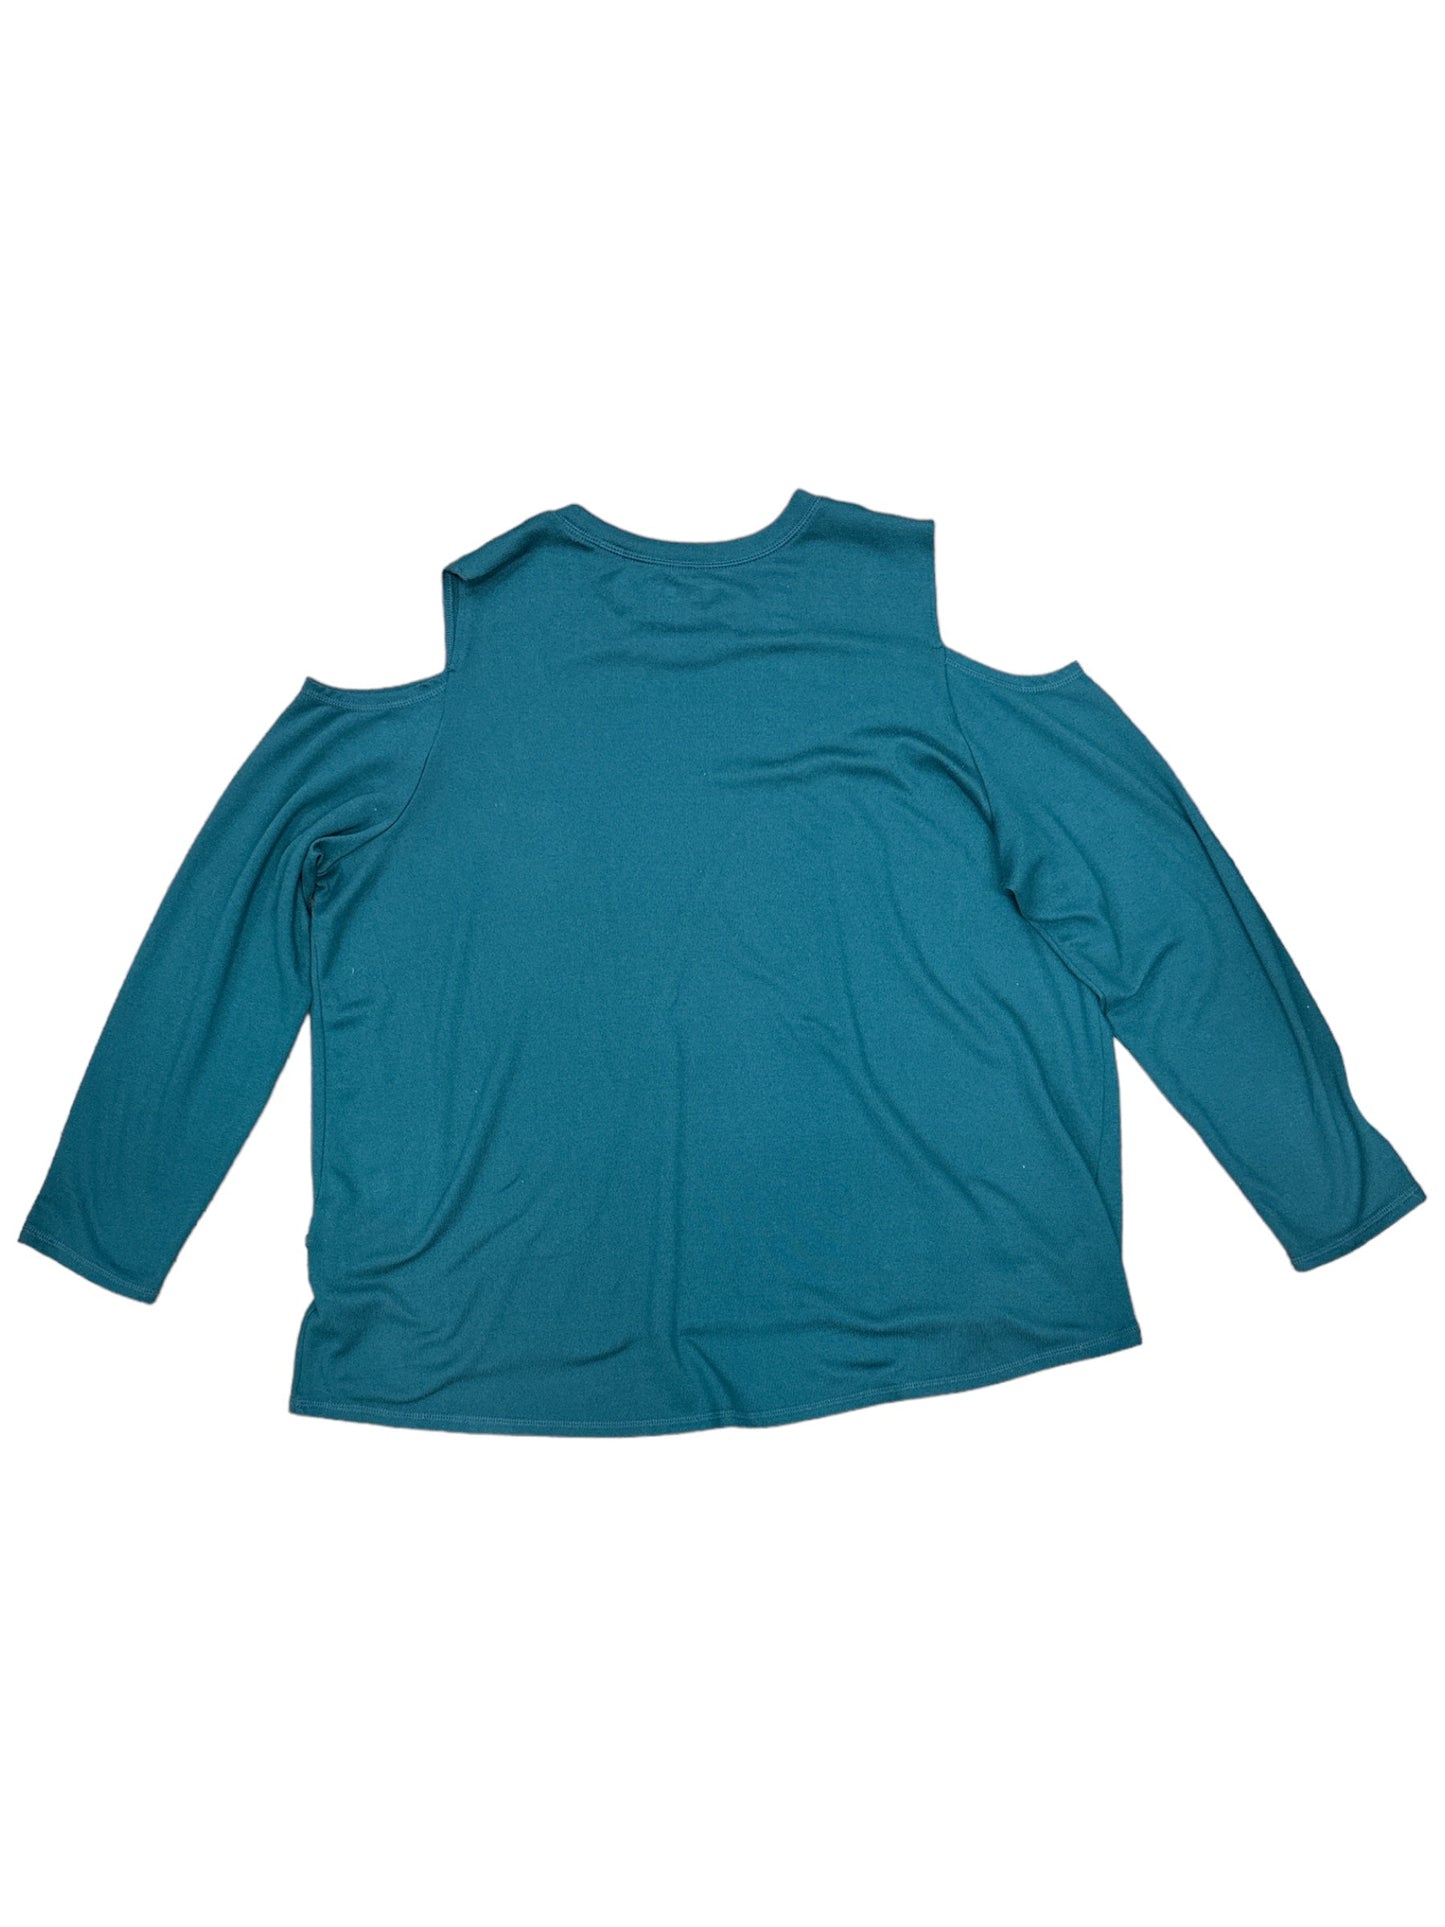 Athletic Top Long Sleeve Crewneck By Xersion  Size: 1x